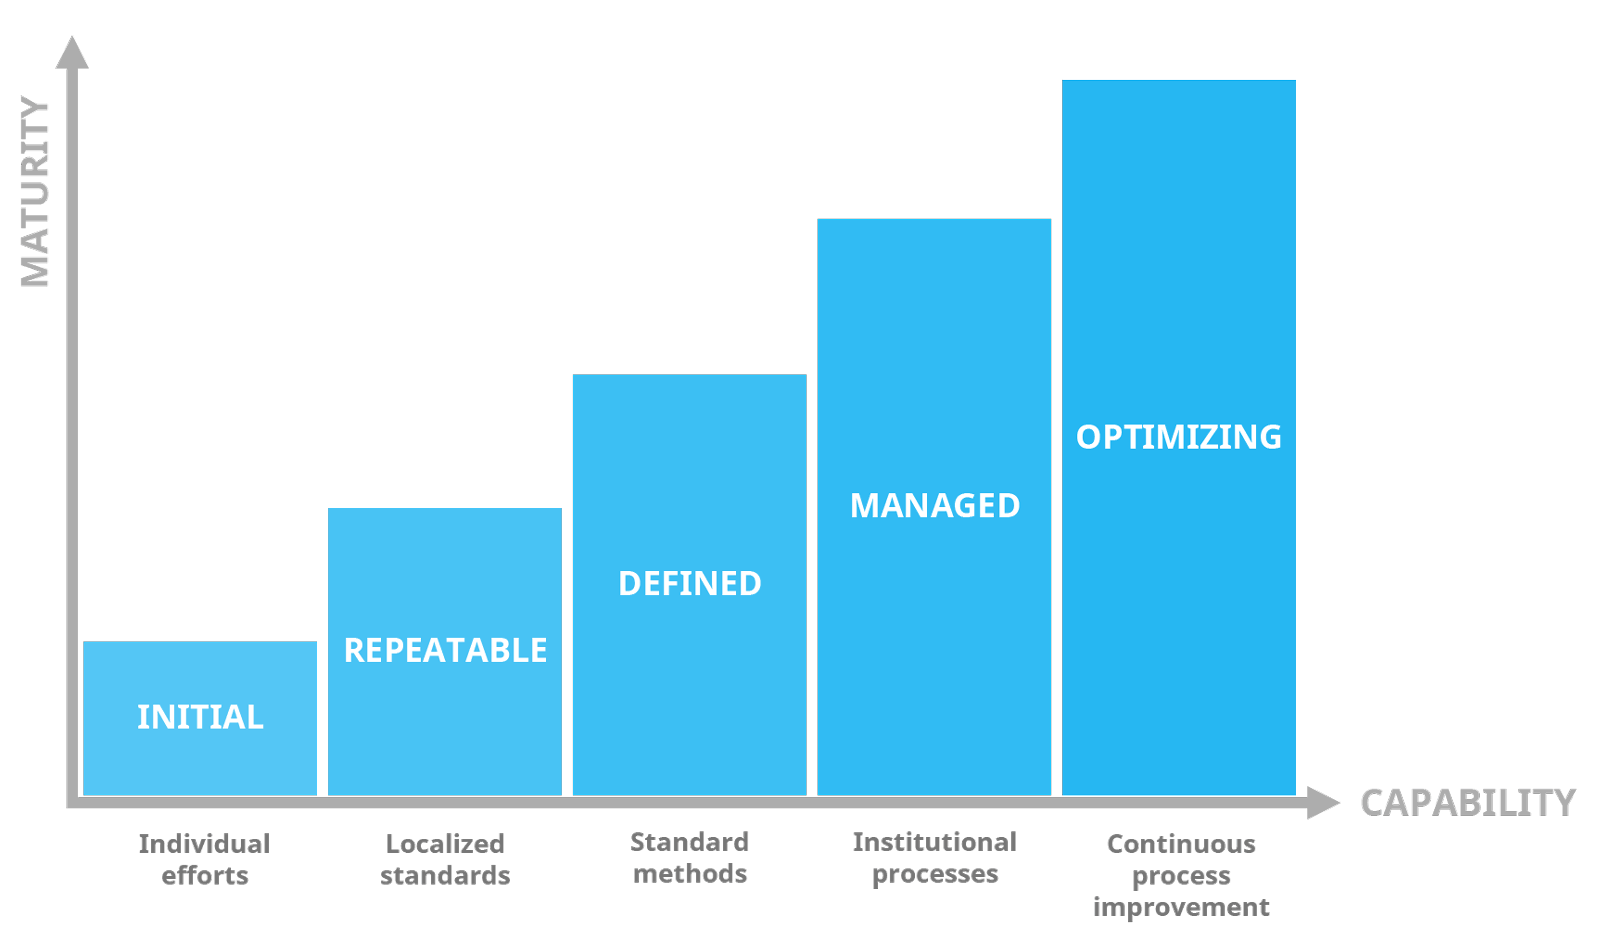 A traditional CMMI-style innovation maturity model